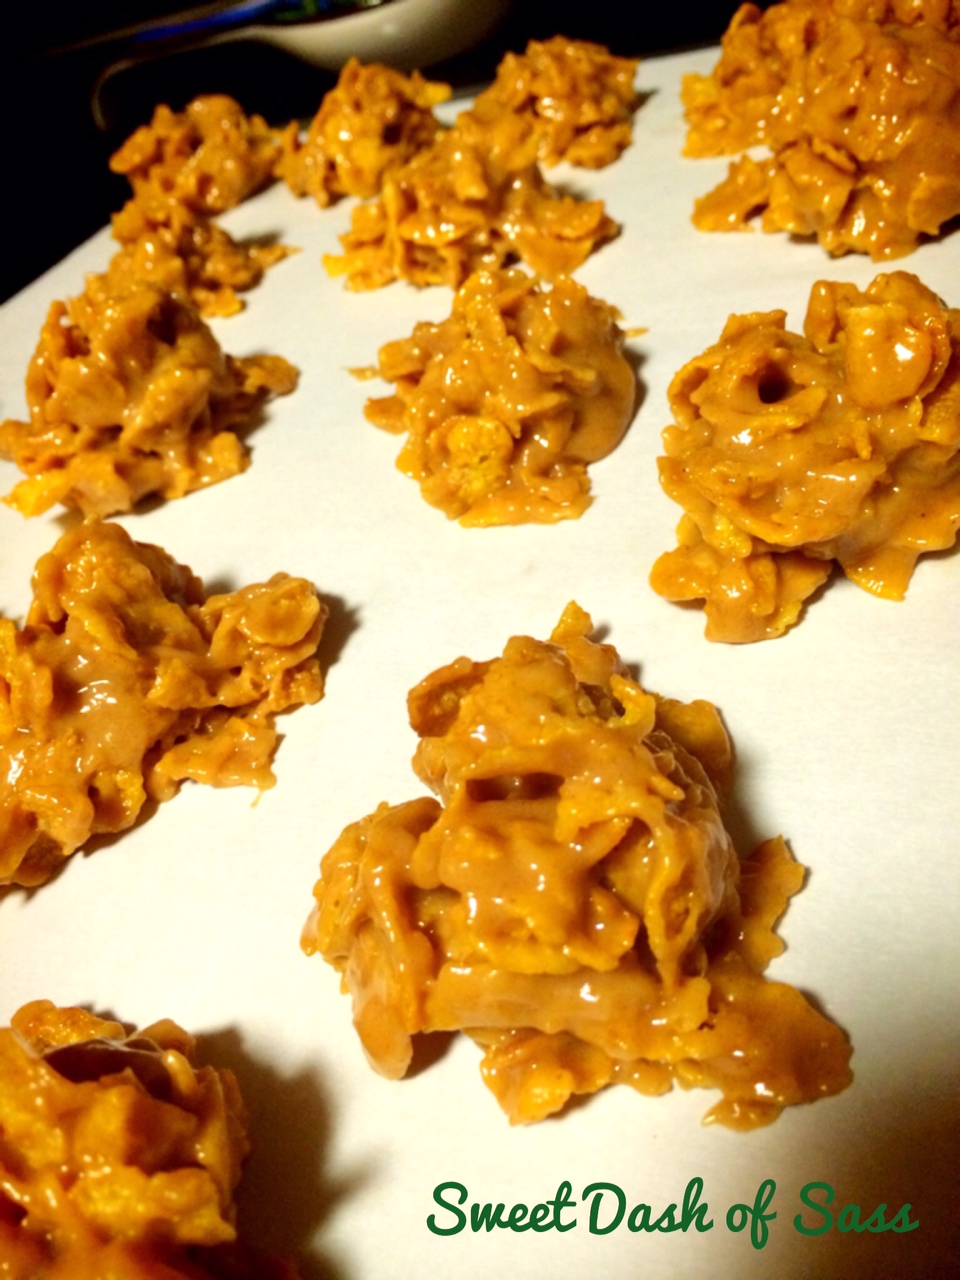 Peanut Butter Corn Flake Treats - 25 Days of Christmas, Cookie Style - www.SweetDashofSass.com